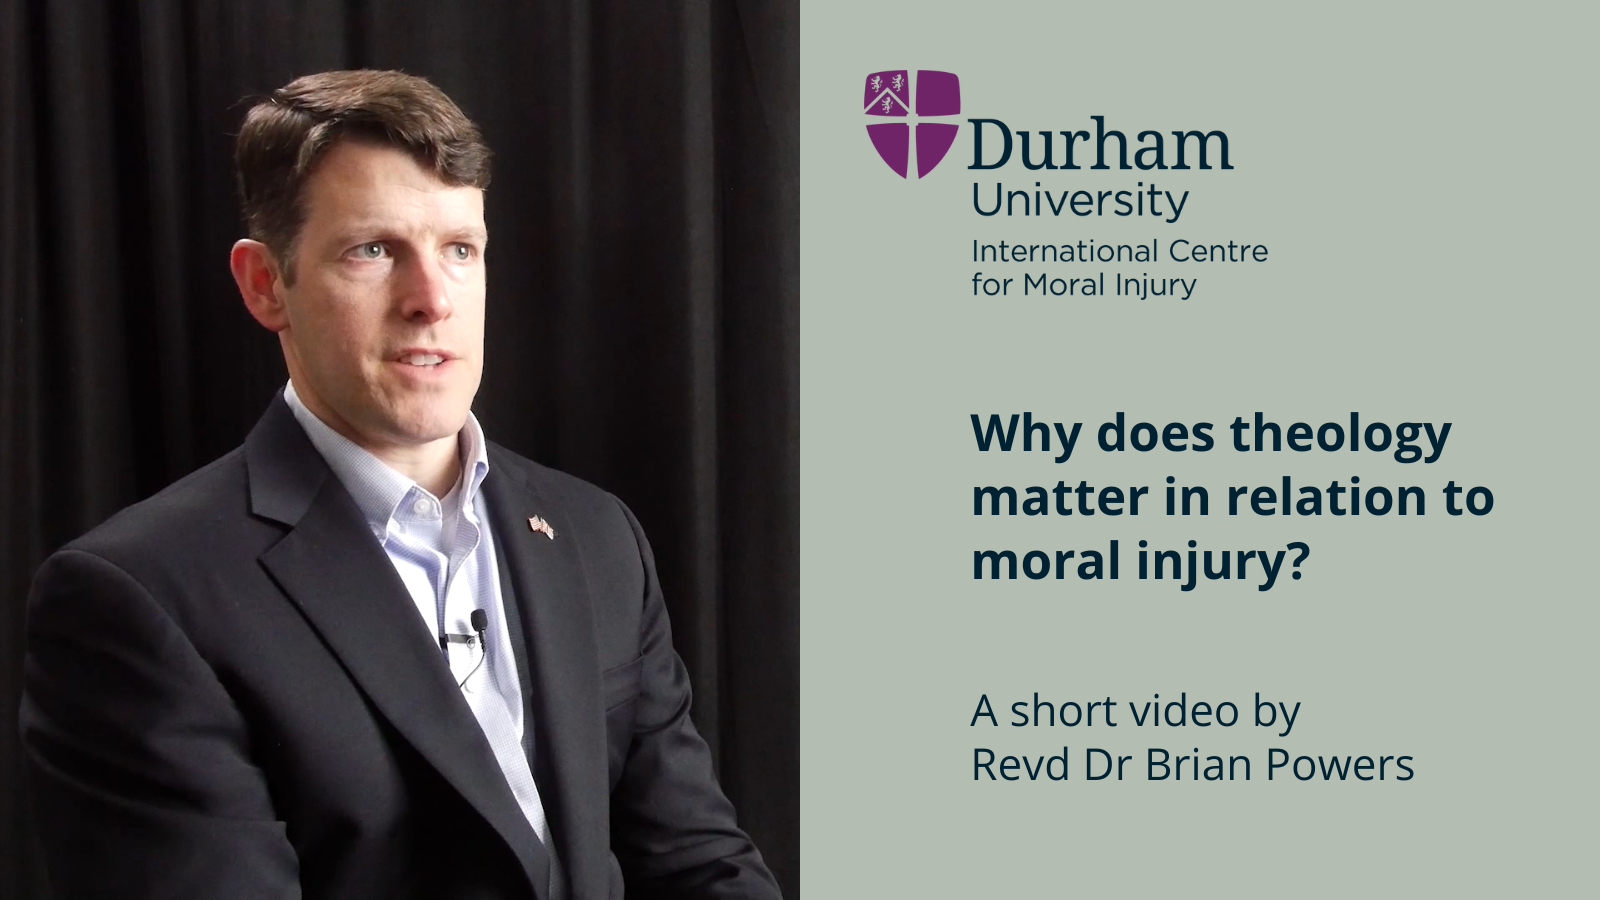 Why does theology matter in relation to moral injury?